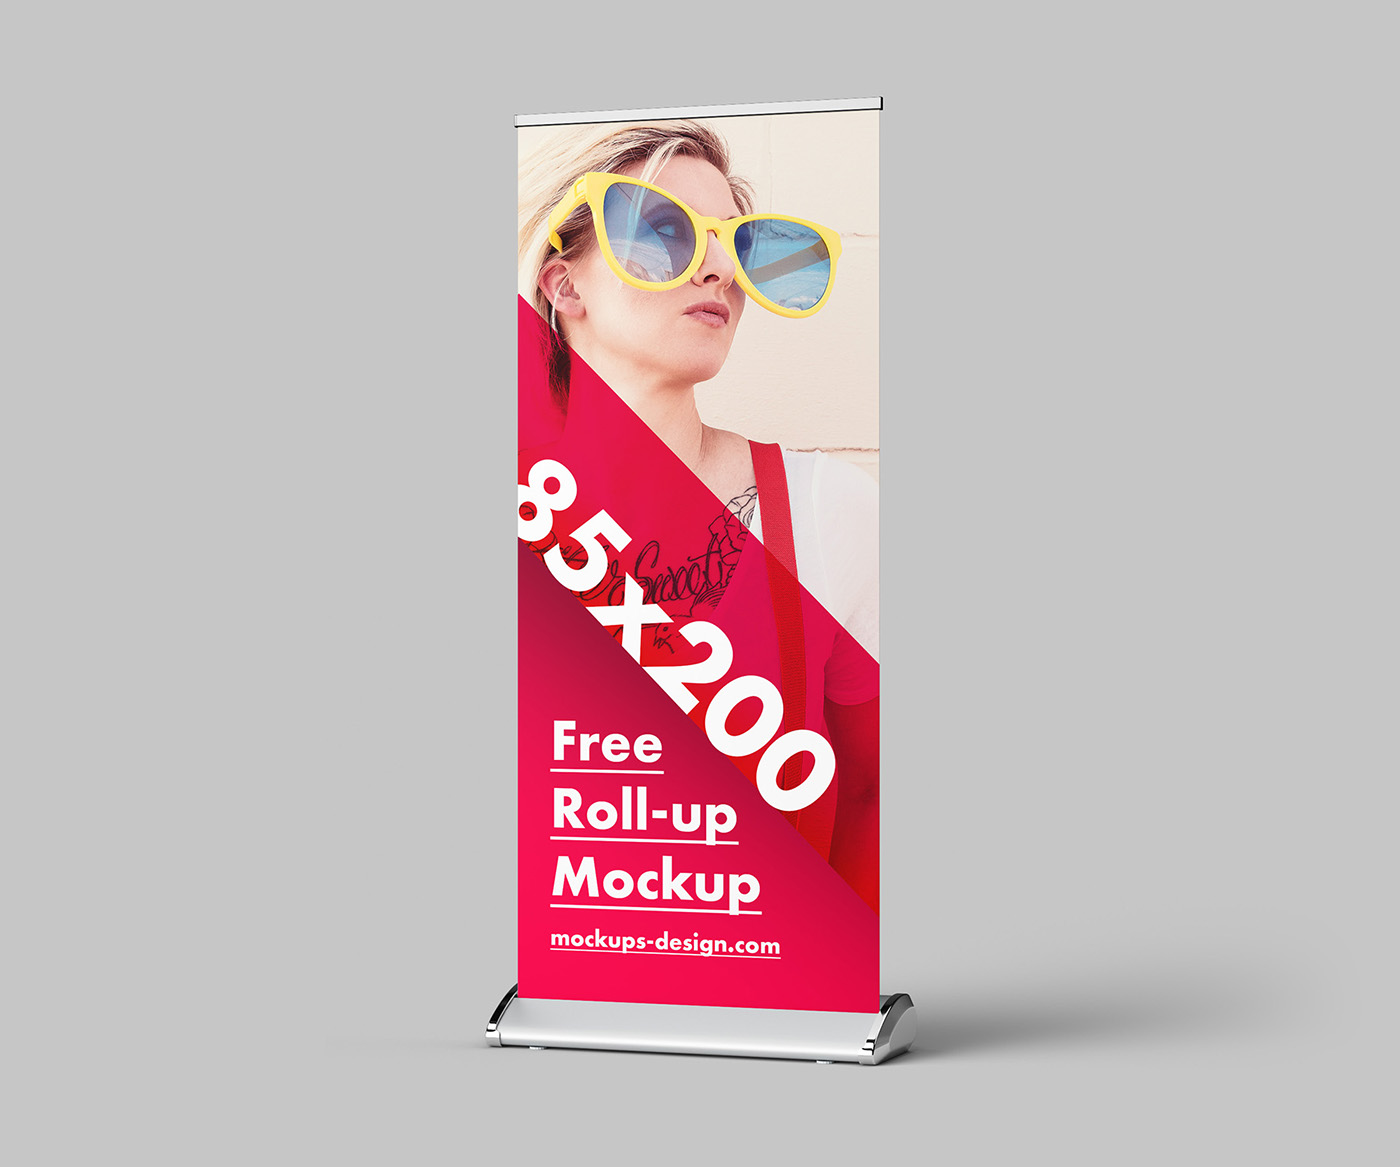 Download Free roll-up mockup / 85x200 on Behance